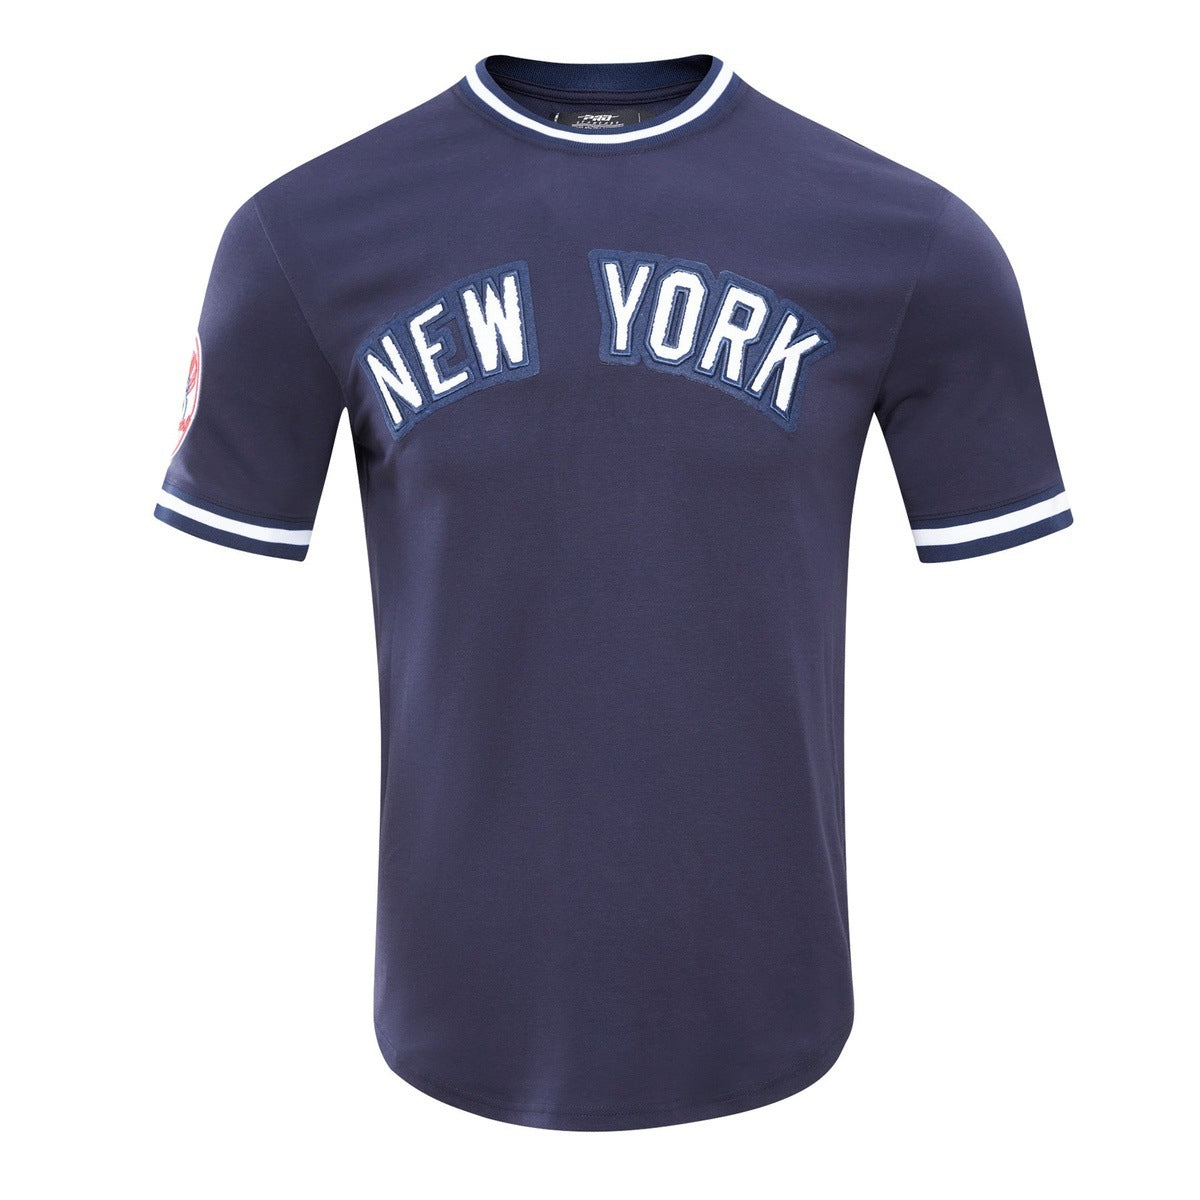 Pro Standard New York Yankees Cream Cooperstown Collection Retro Old  English Pullover Sweatshirt